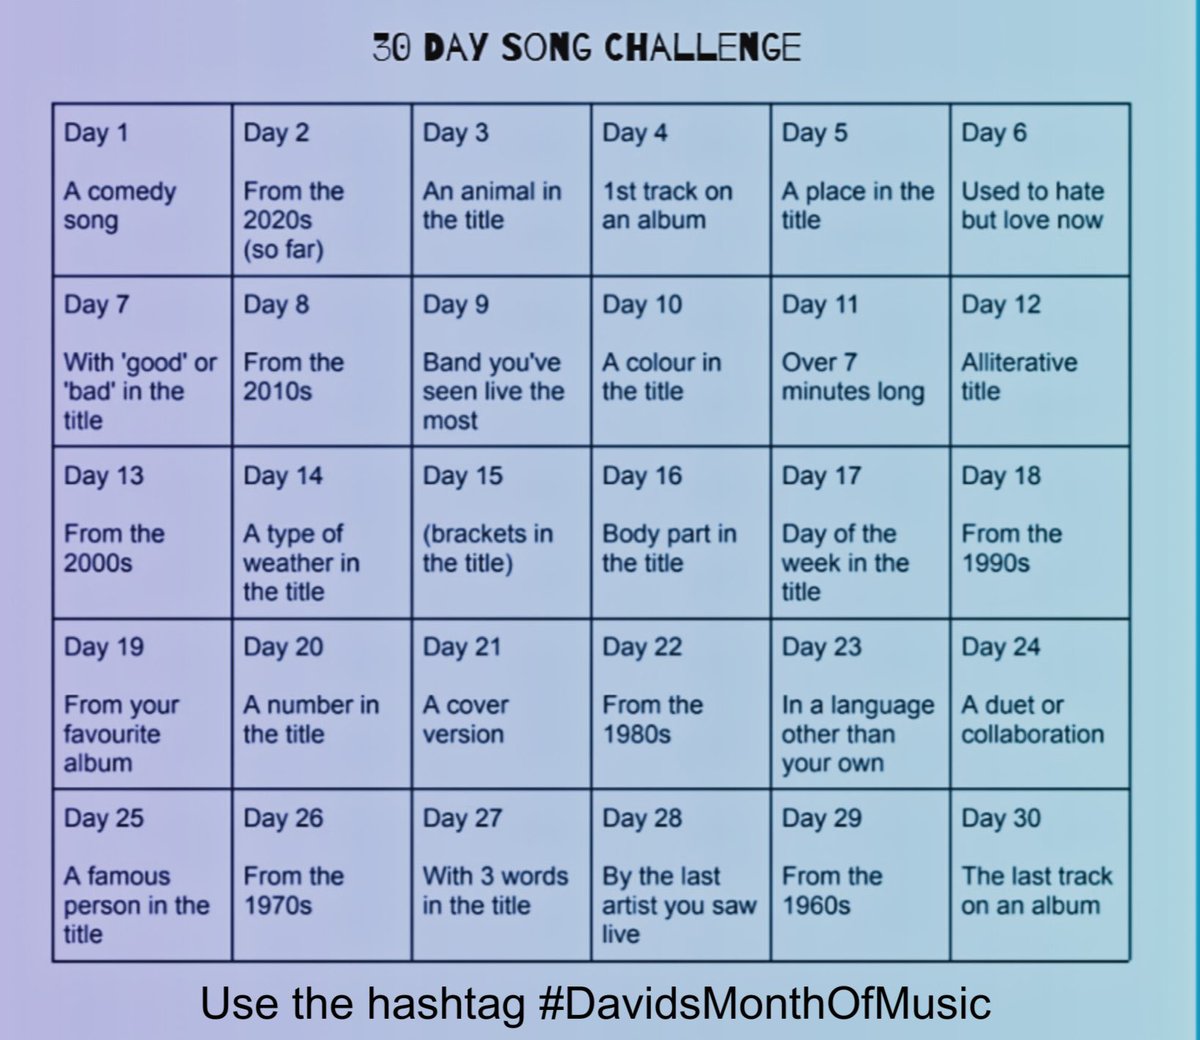 Day 21: a cover #DavidsMonthofMusic Incubus - Still Not A Player (Big Pun Cover) youtu.be/WVSEPirUPB4?si… via @YouTube